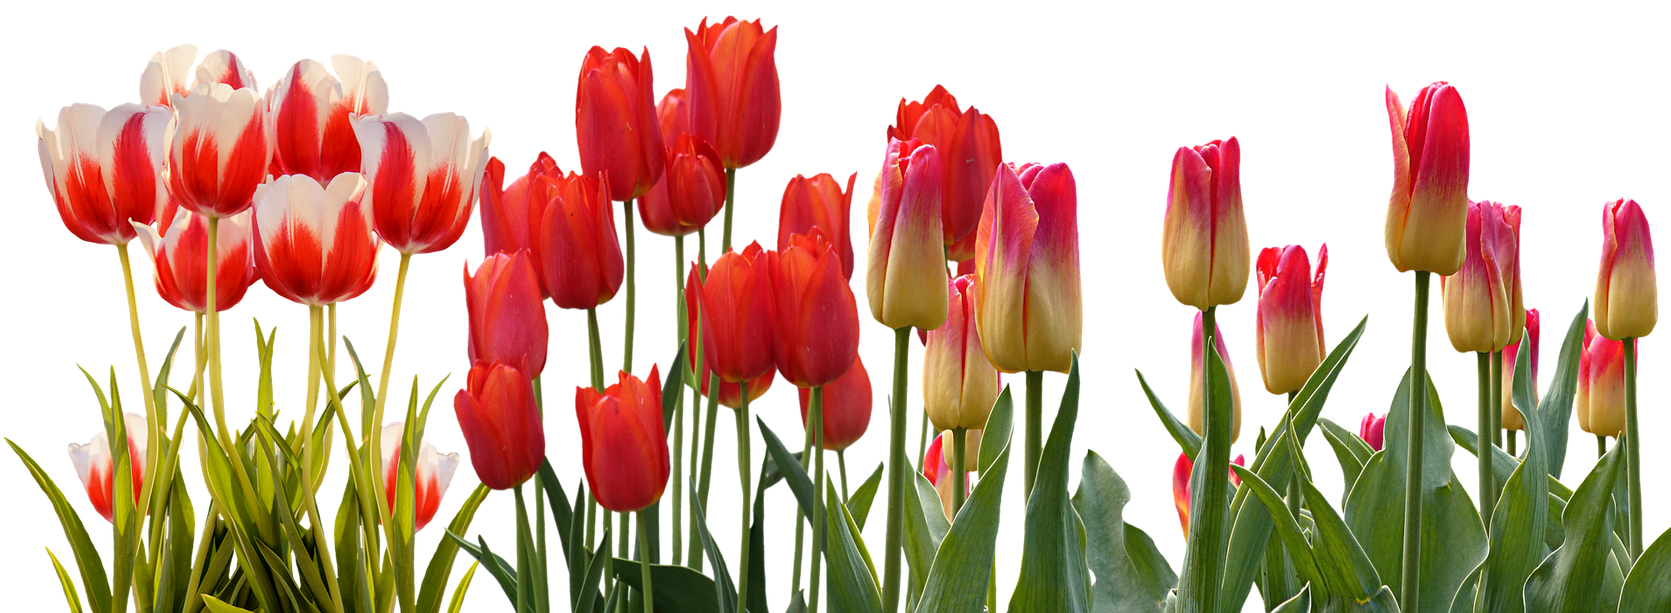 A Group Of Red And Yellow Tulips